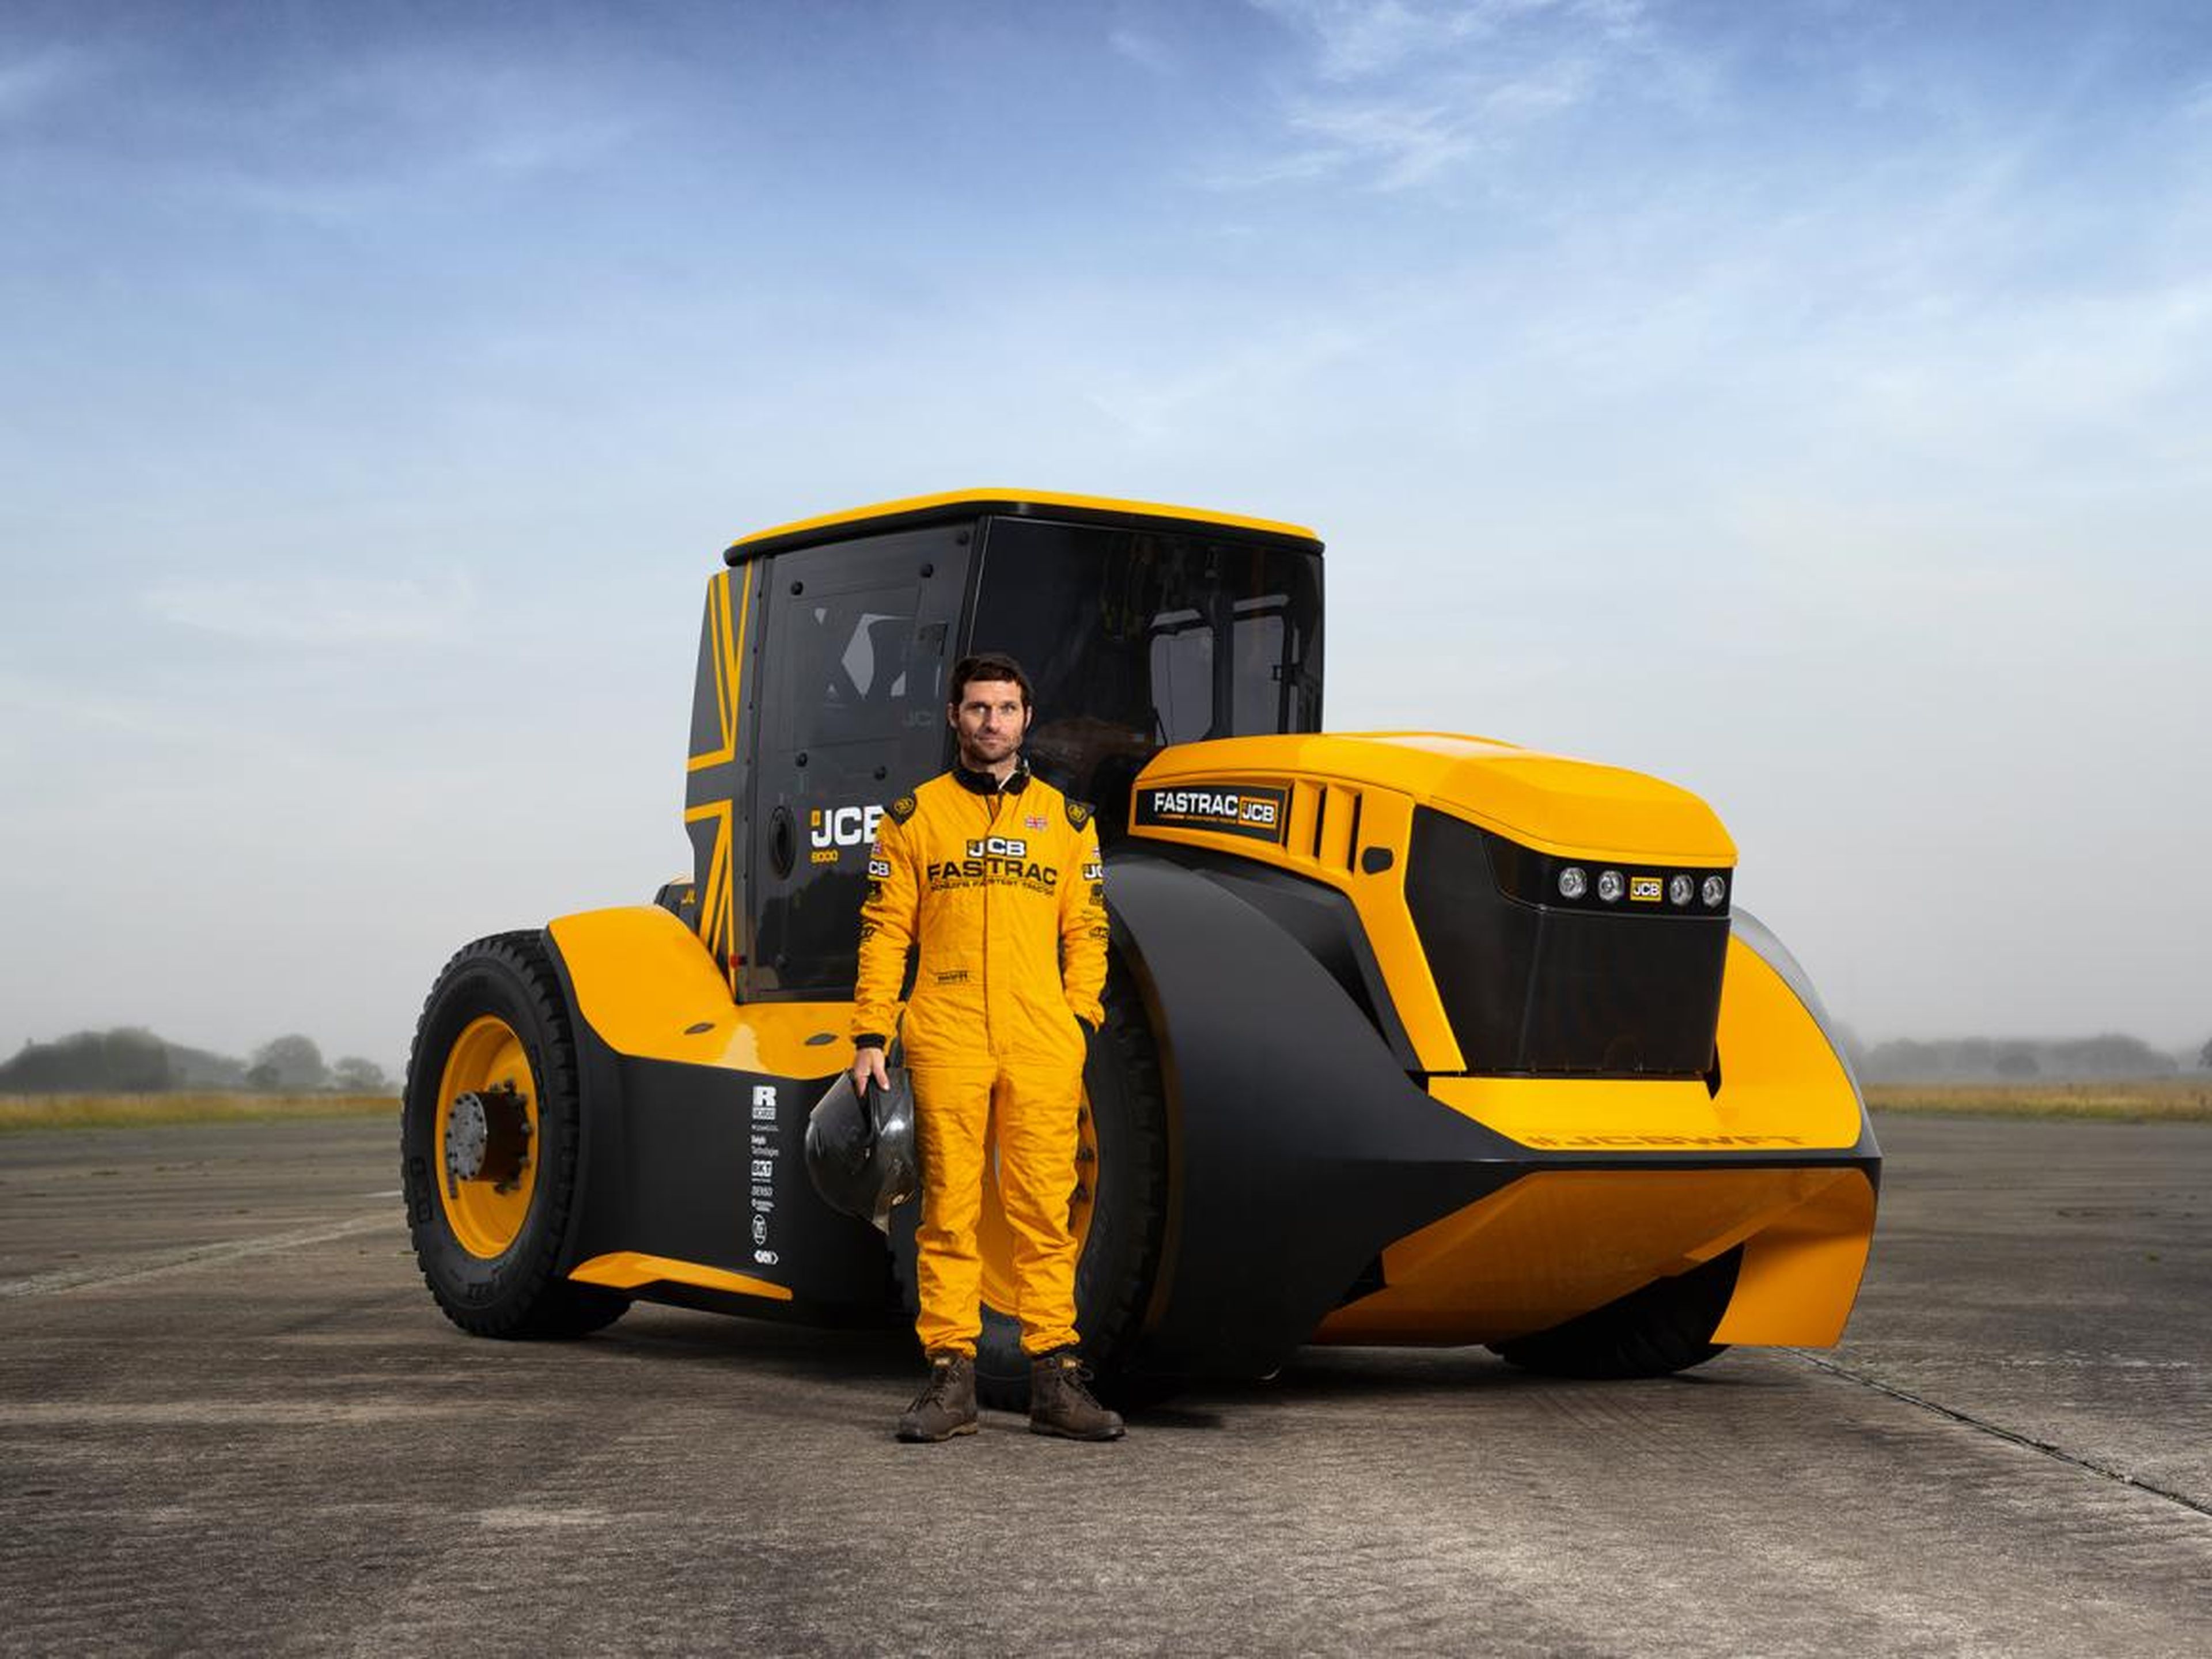 The record was set by a modified JCB Fastrac tractor, the JCB 8000-series.